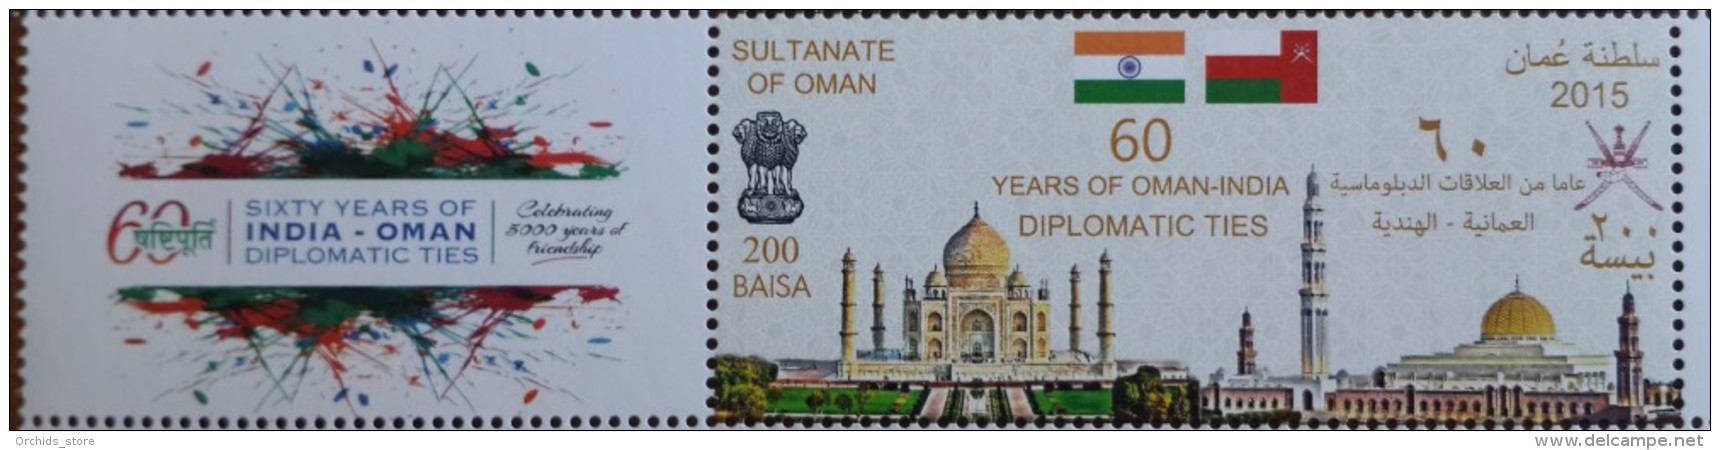 Sultanate Of Oman 2016 MNH Stamp - 60 Years Of Oman & India Diplomatic Ties - Omán